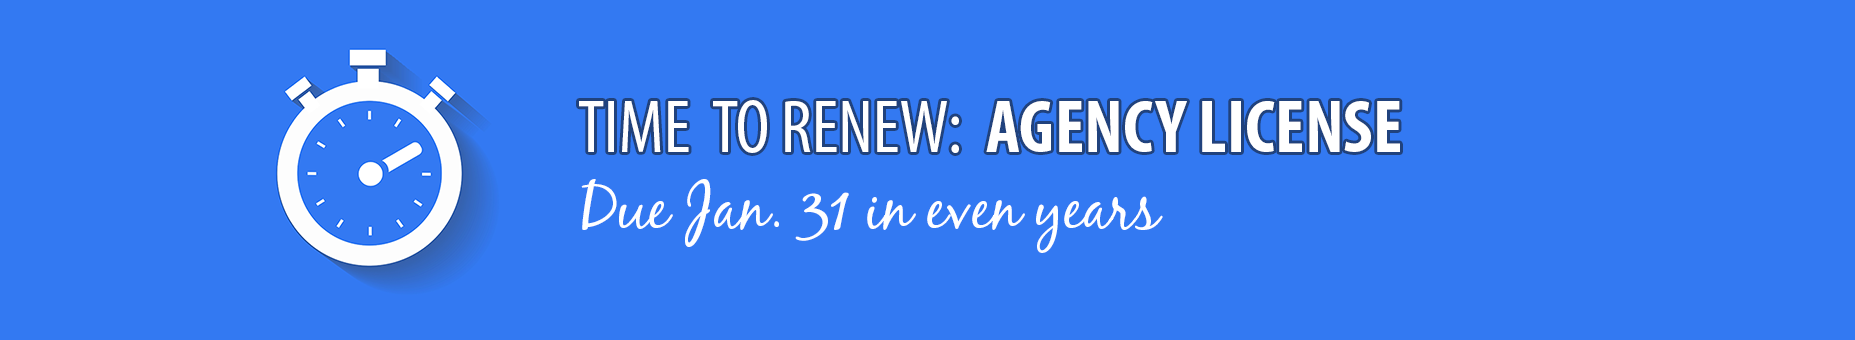 Time To Renew - Agency License Renewals